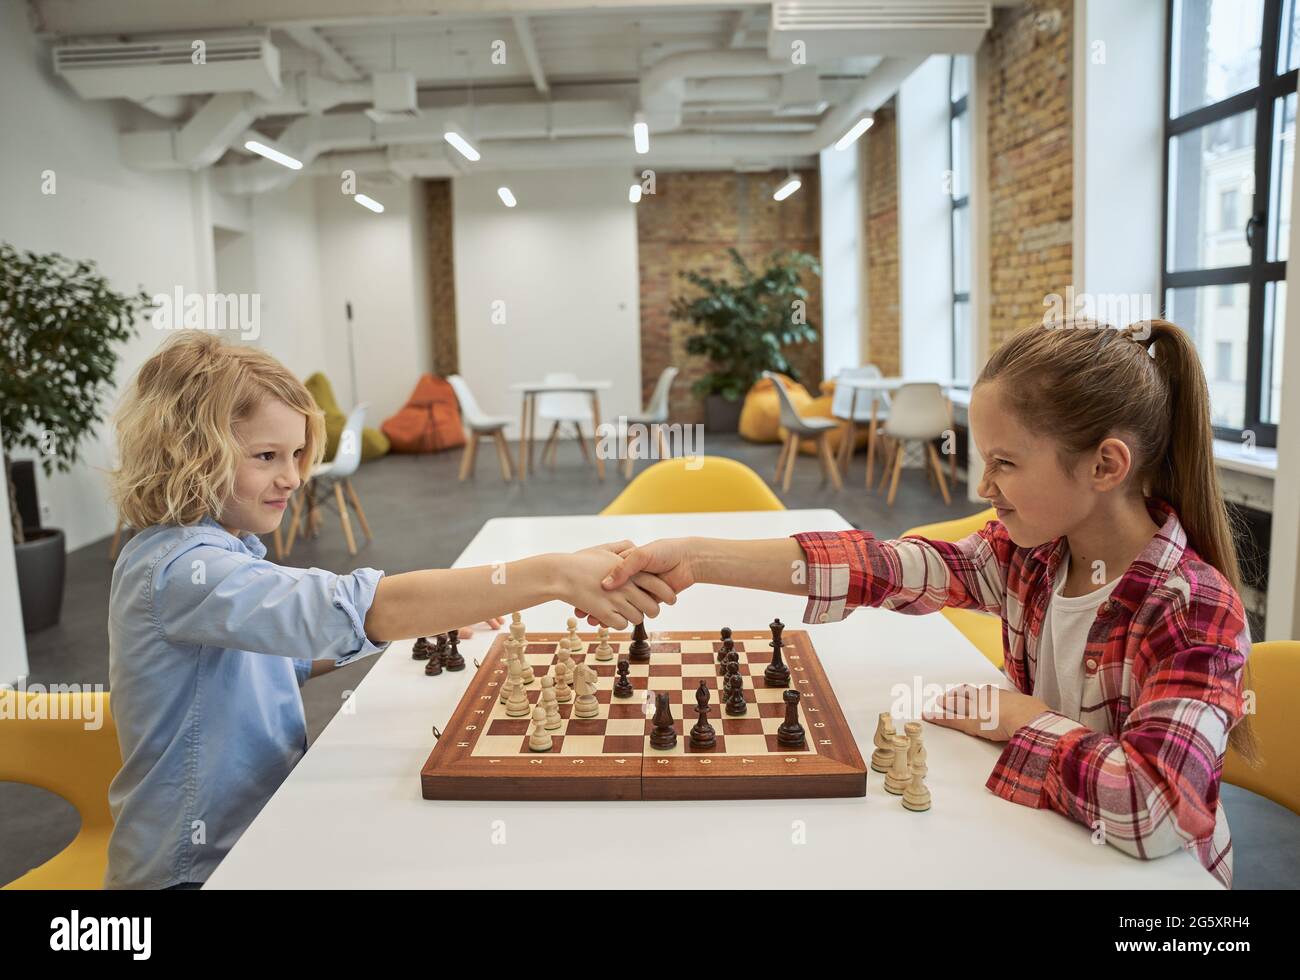 Rivalry. Two little children, boy and girl shaking hands after match, playing board game, sitting together at the table in school Stock Photo